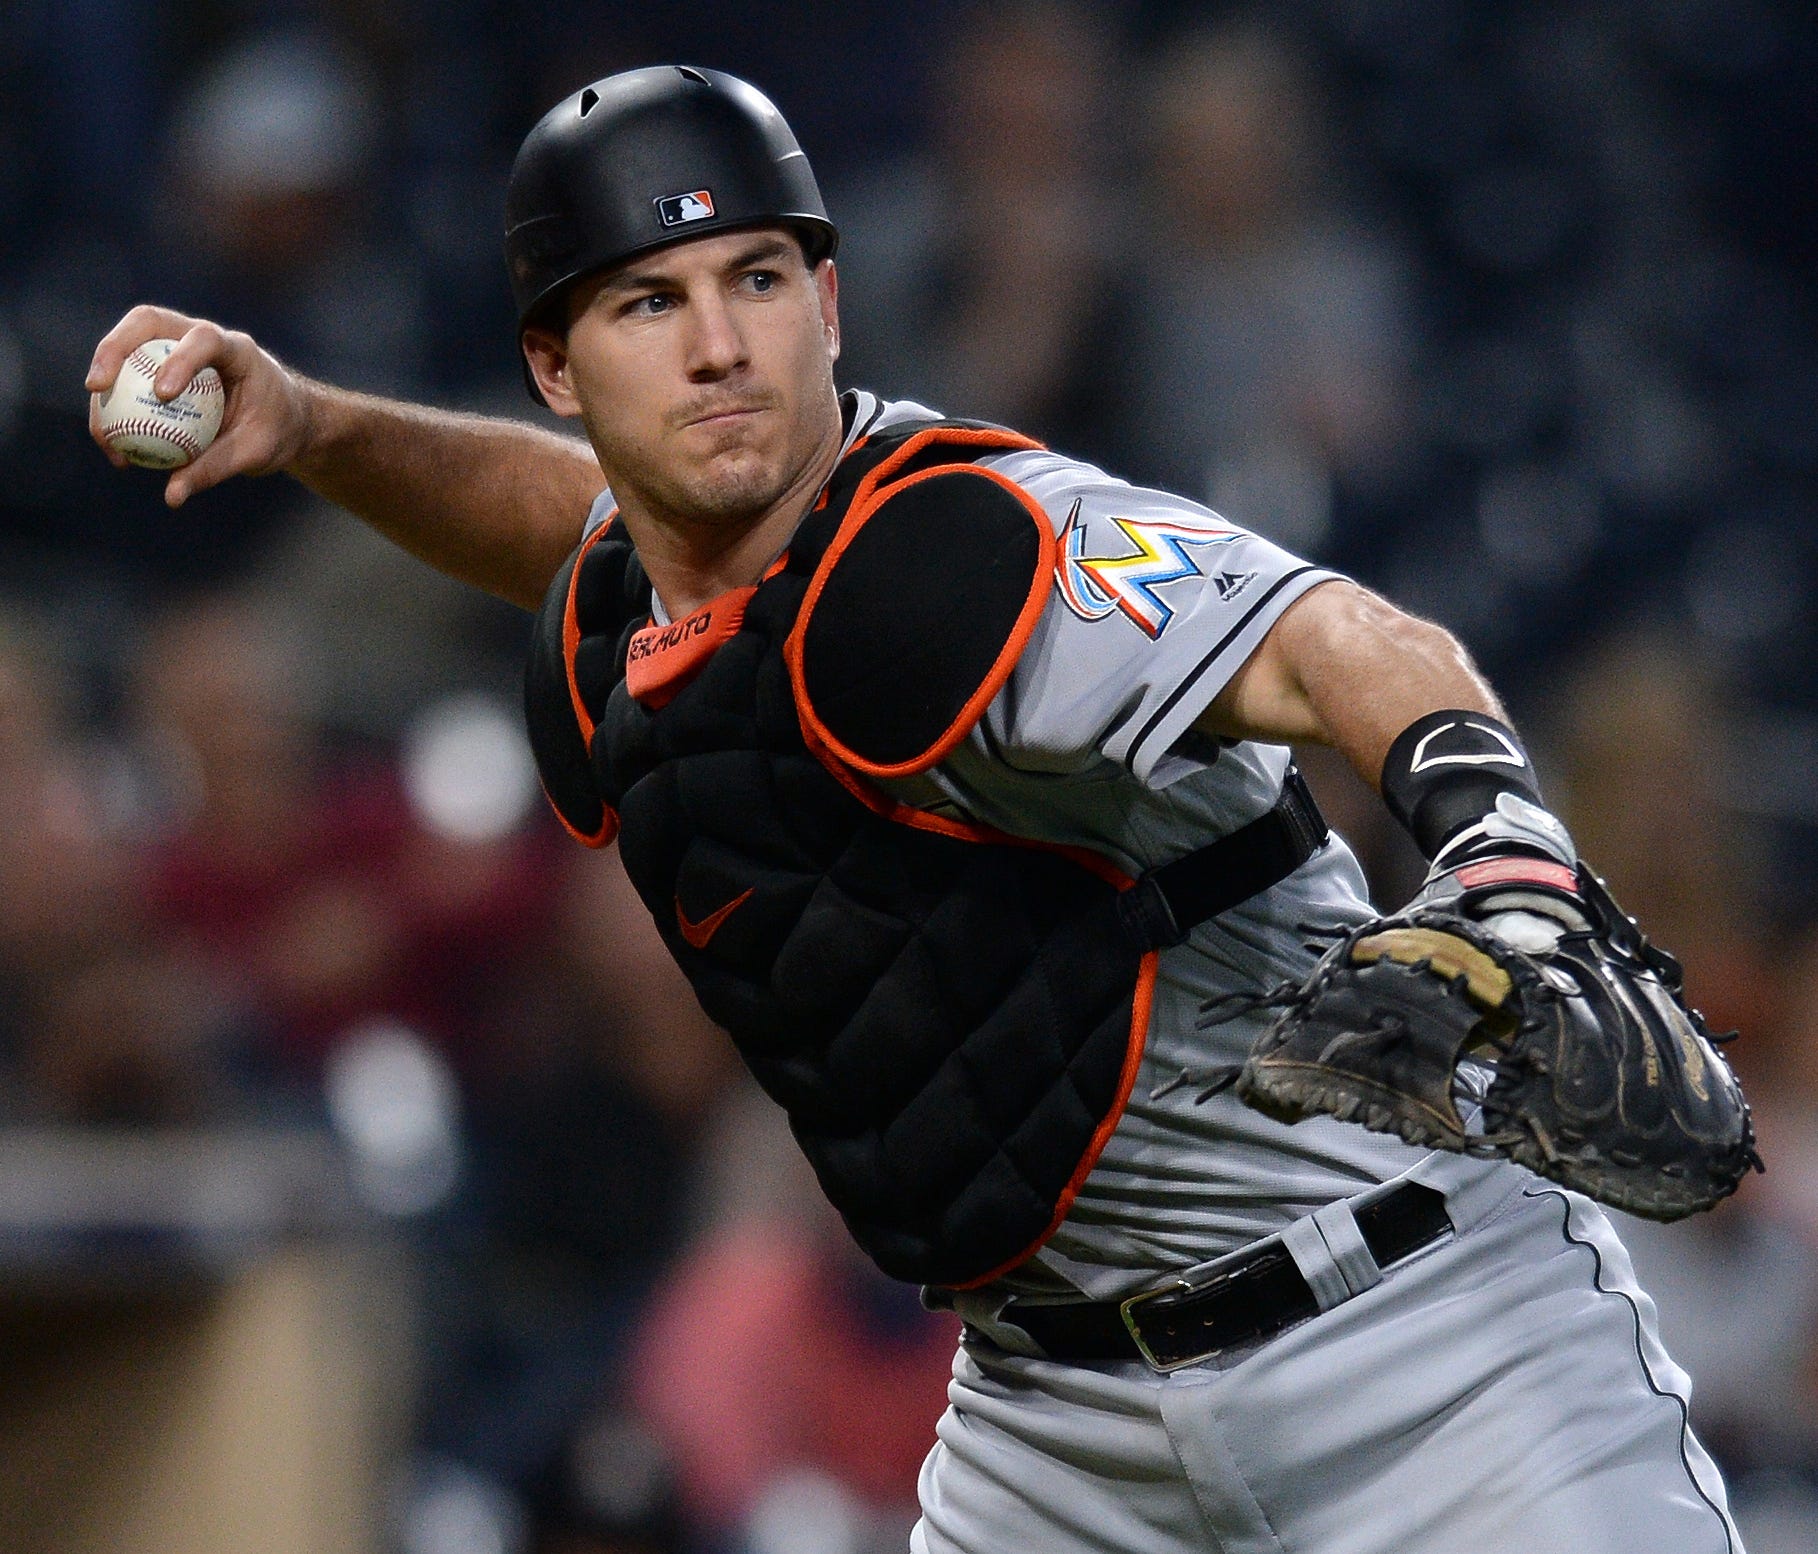 J.T. Realmuto is enjoying an All-Star-caliber season, leading all major league catchers with at least 200 at-bats in batting average (.297) and OPS (.879).